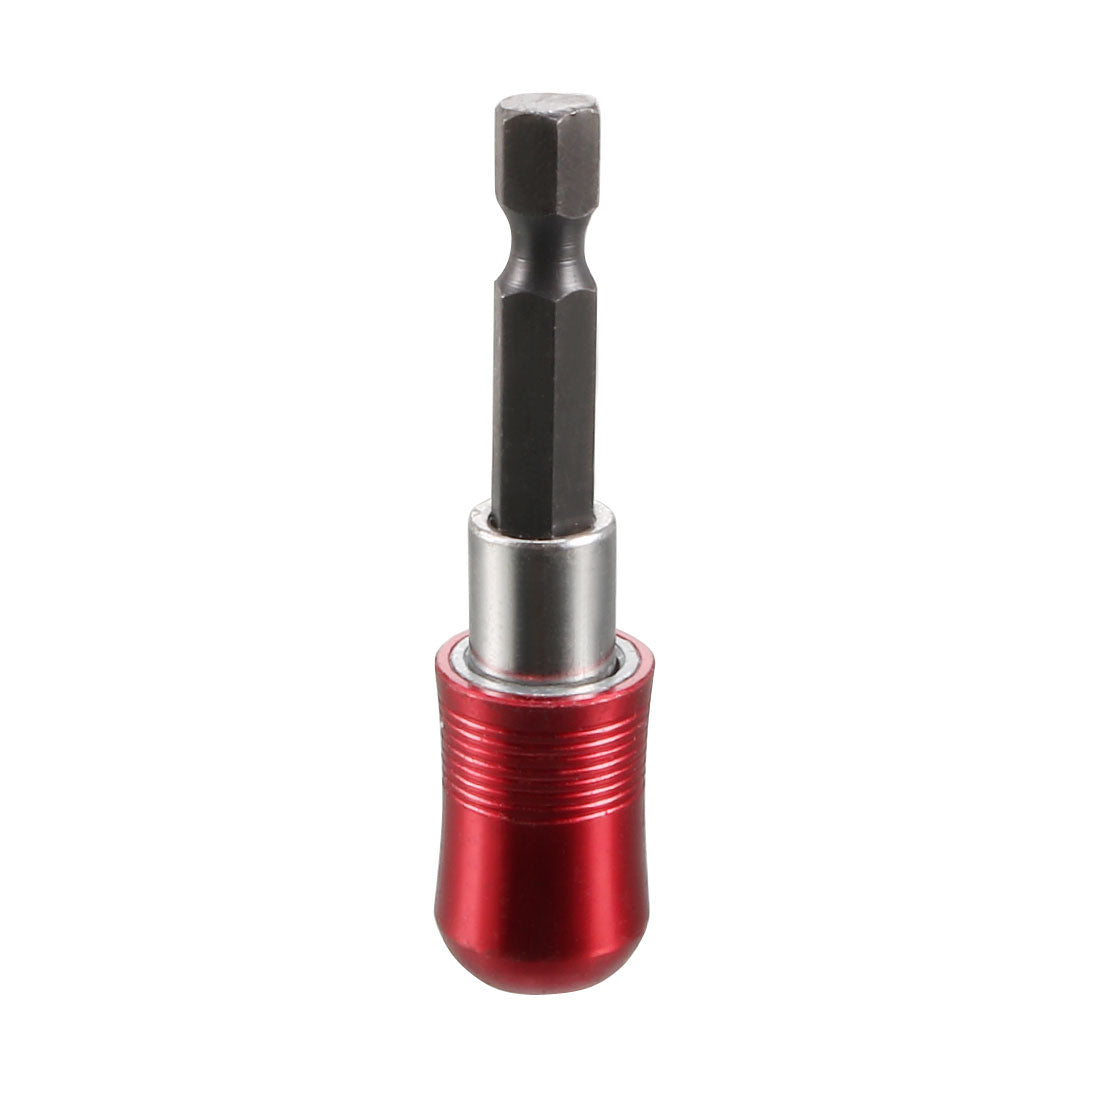 uxcell Uxcell Extension Extend Socket Drill Bit Holder, Magnetic Hex Screwdriver Power Tools ,2.4-inch Length,1/4''-Hexagon Drill Red